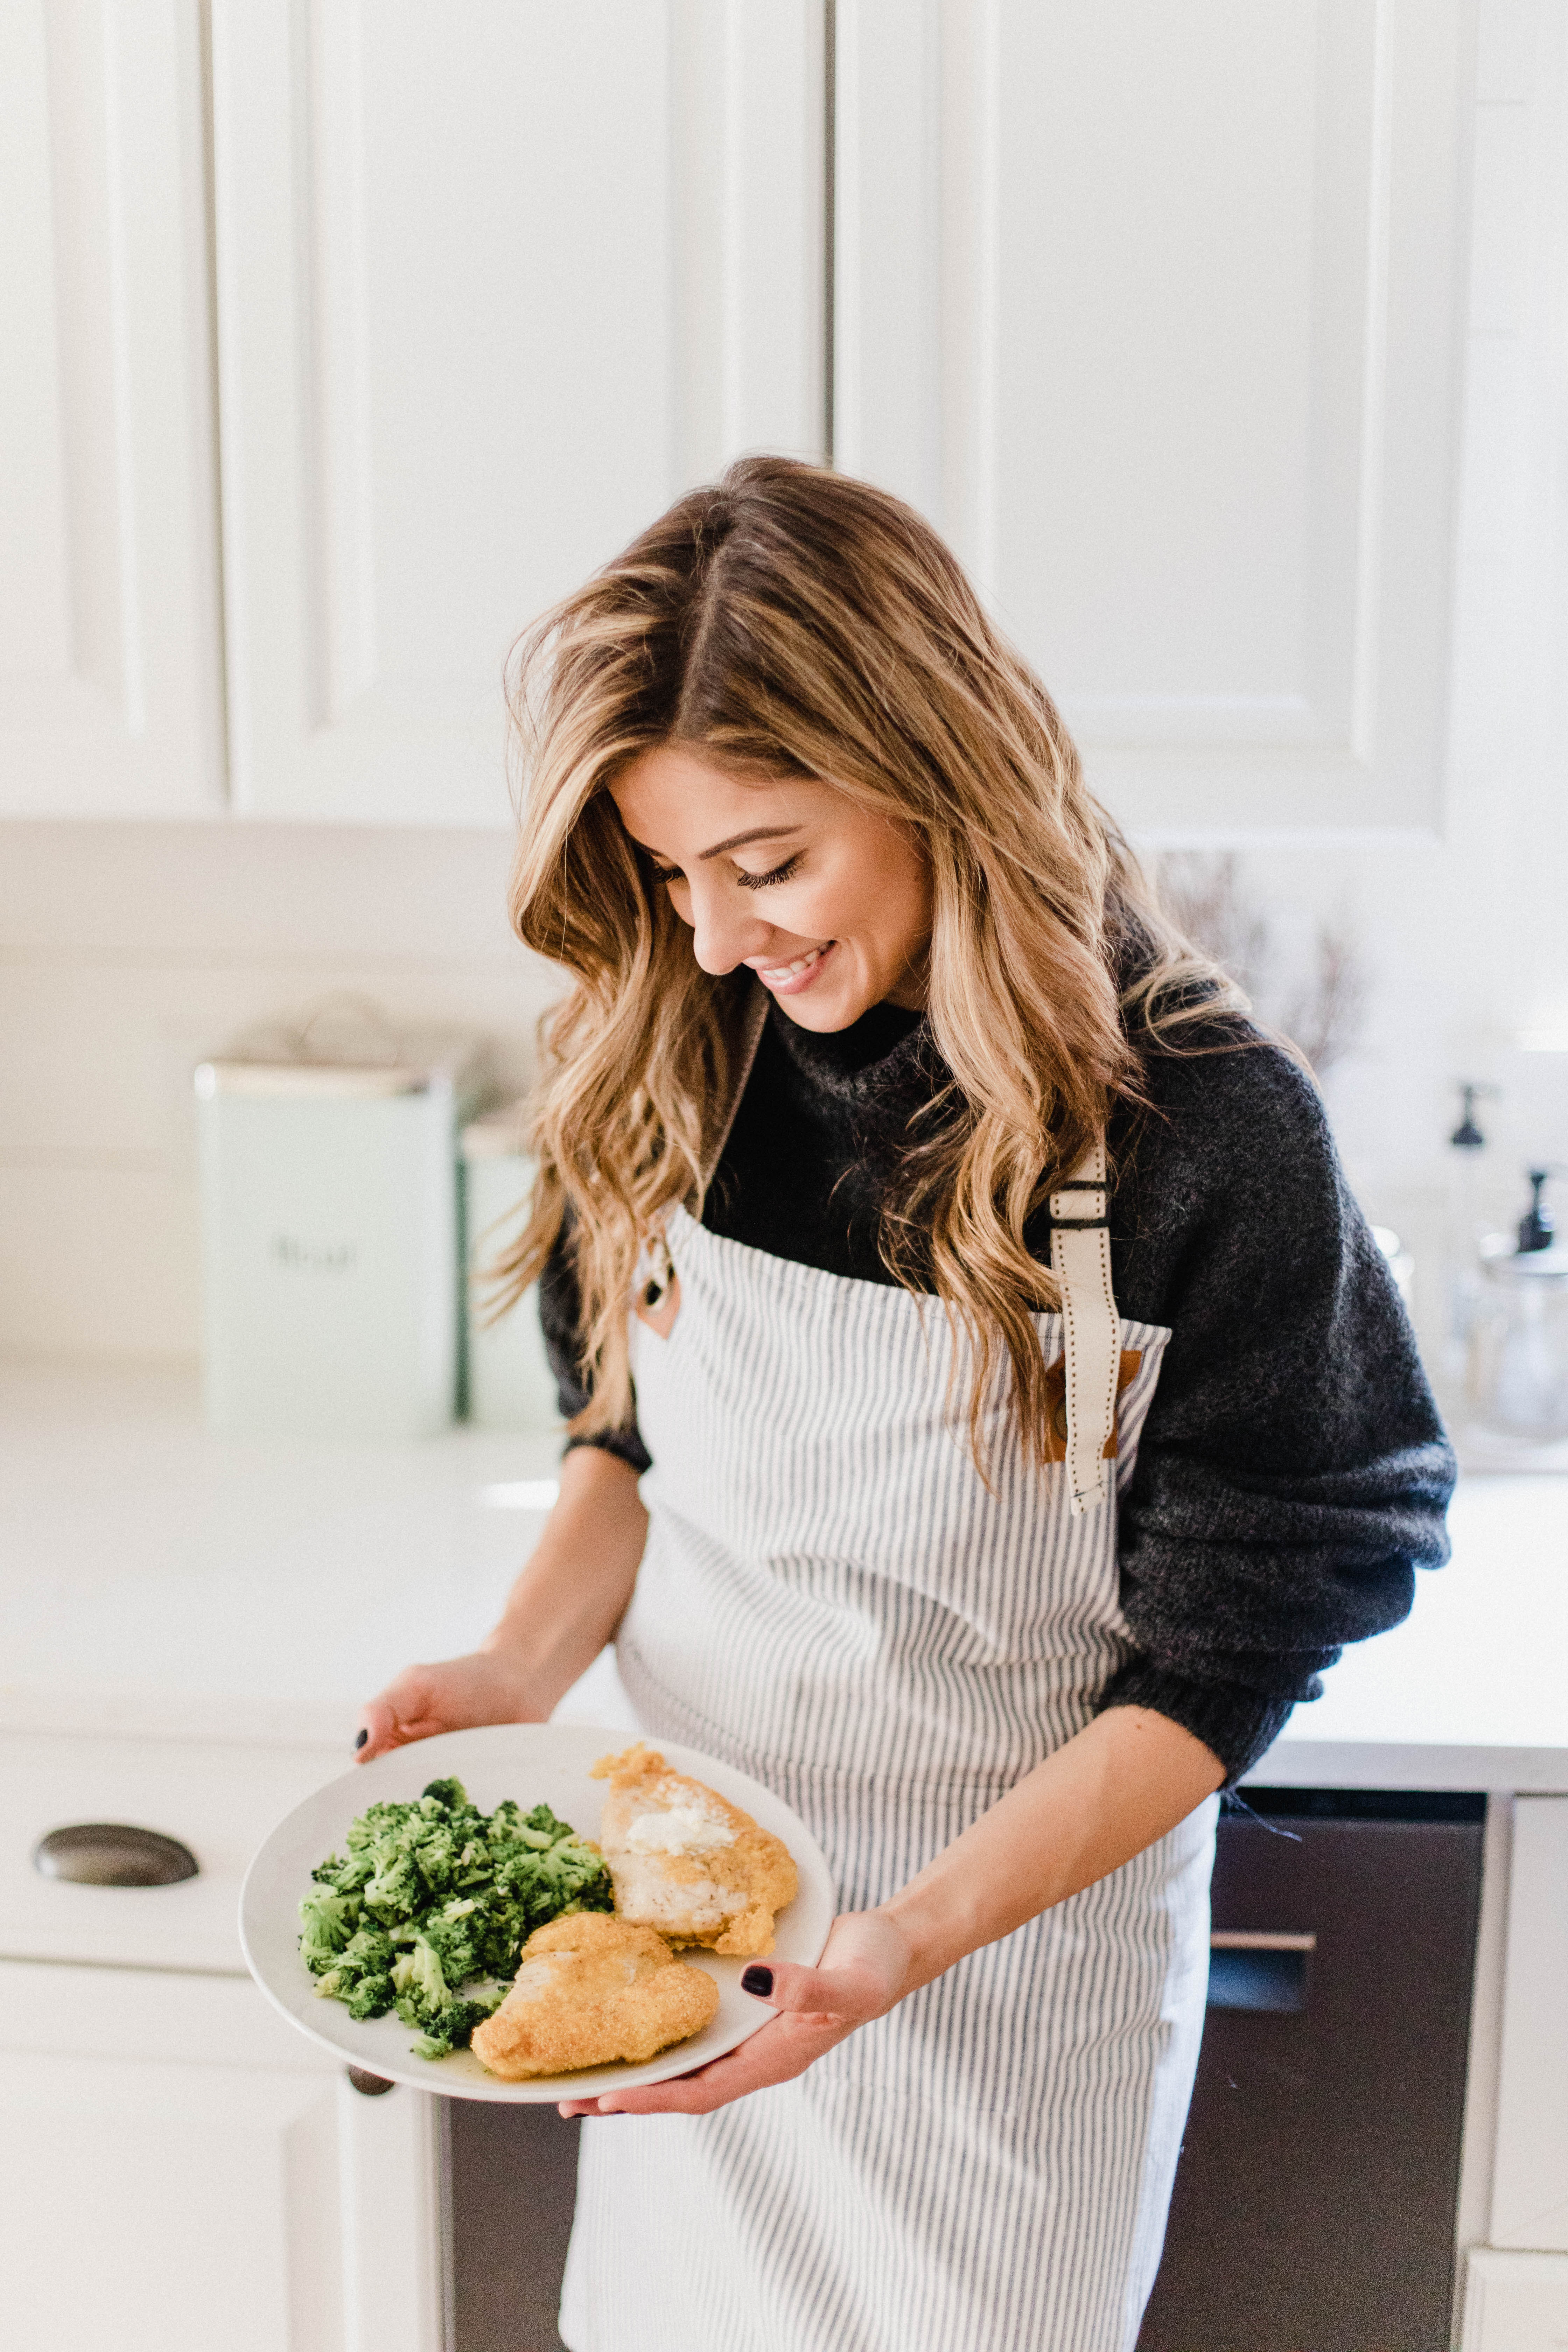 Life and style blogger Lauren McBride shares her Home Chef Meal Makeover Challenge Results, including a review on the meals and what she's learned from the process. 